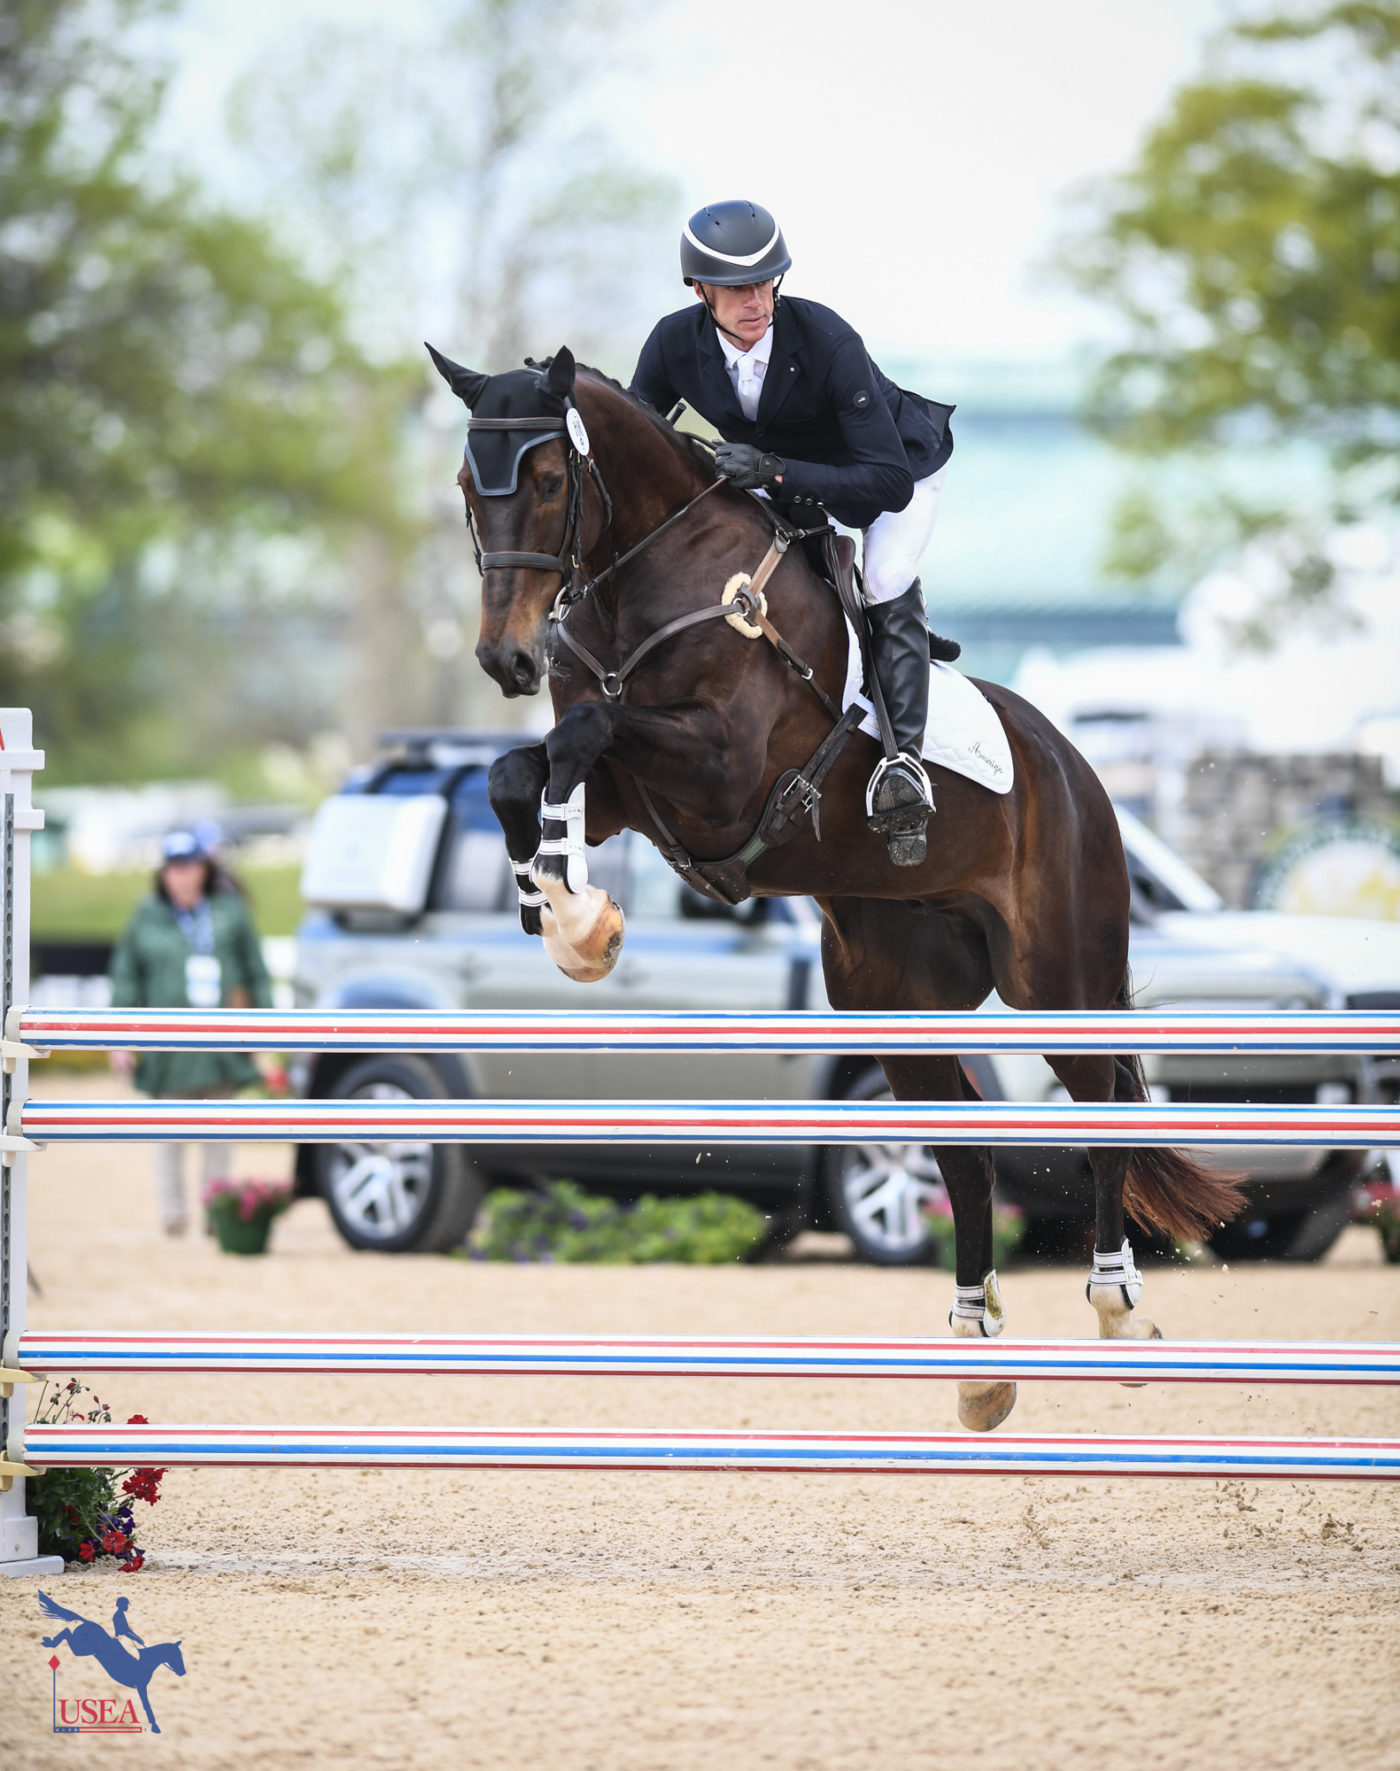 Dan Kreitl and Carmango finished fifth with a clear round. USEA/Lindsay Berreth photo